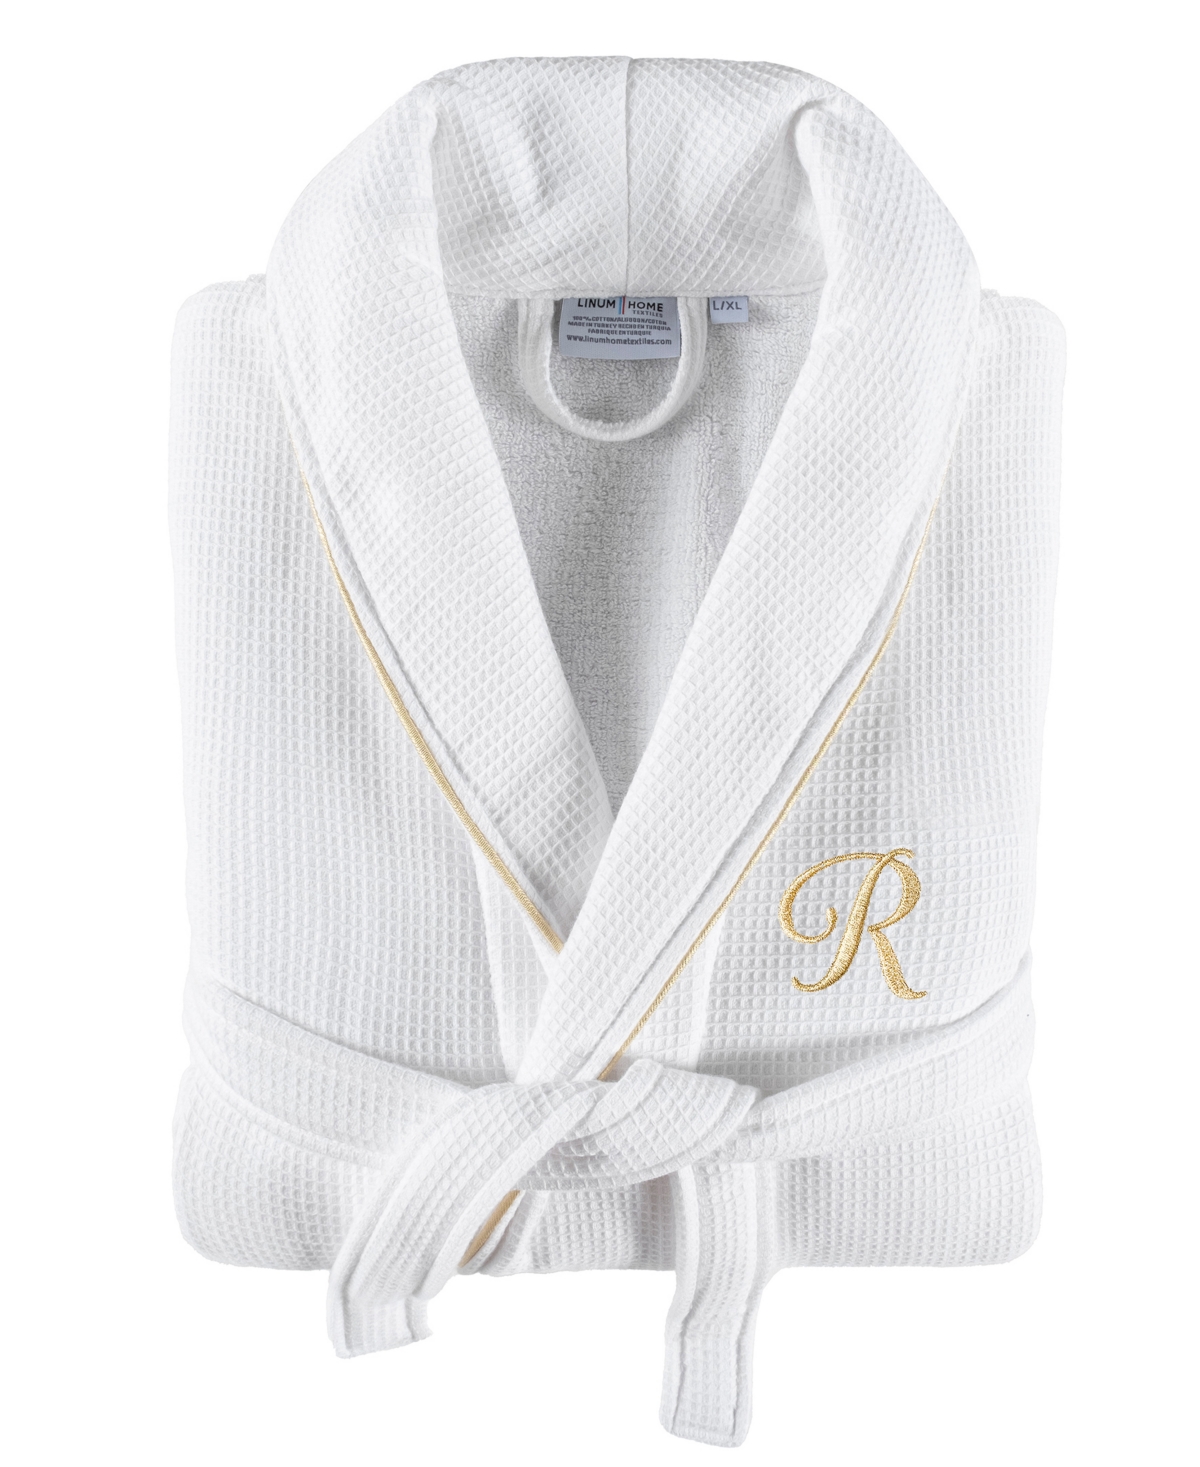 Linum Home Textiles 100% Turkish Cotton Unisex Personalized Waffle Weave Terry Bathrobe With Satin Piped Trim In White R